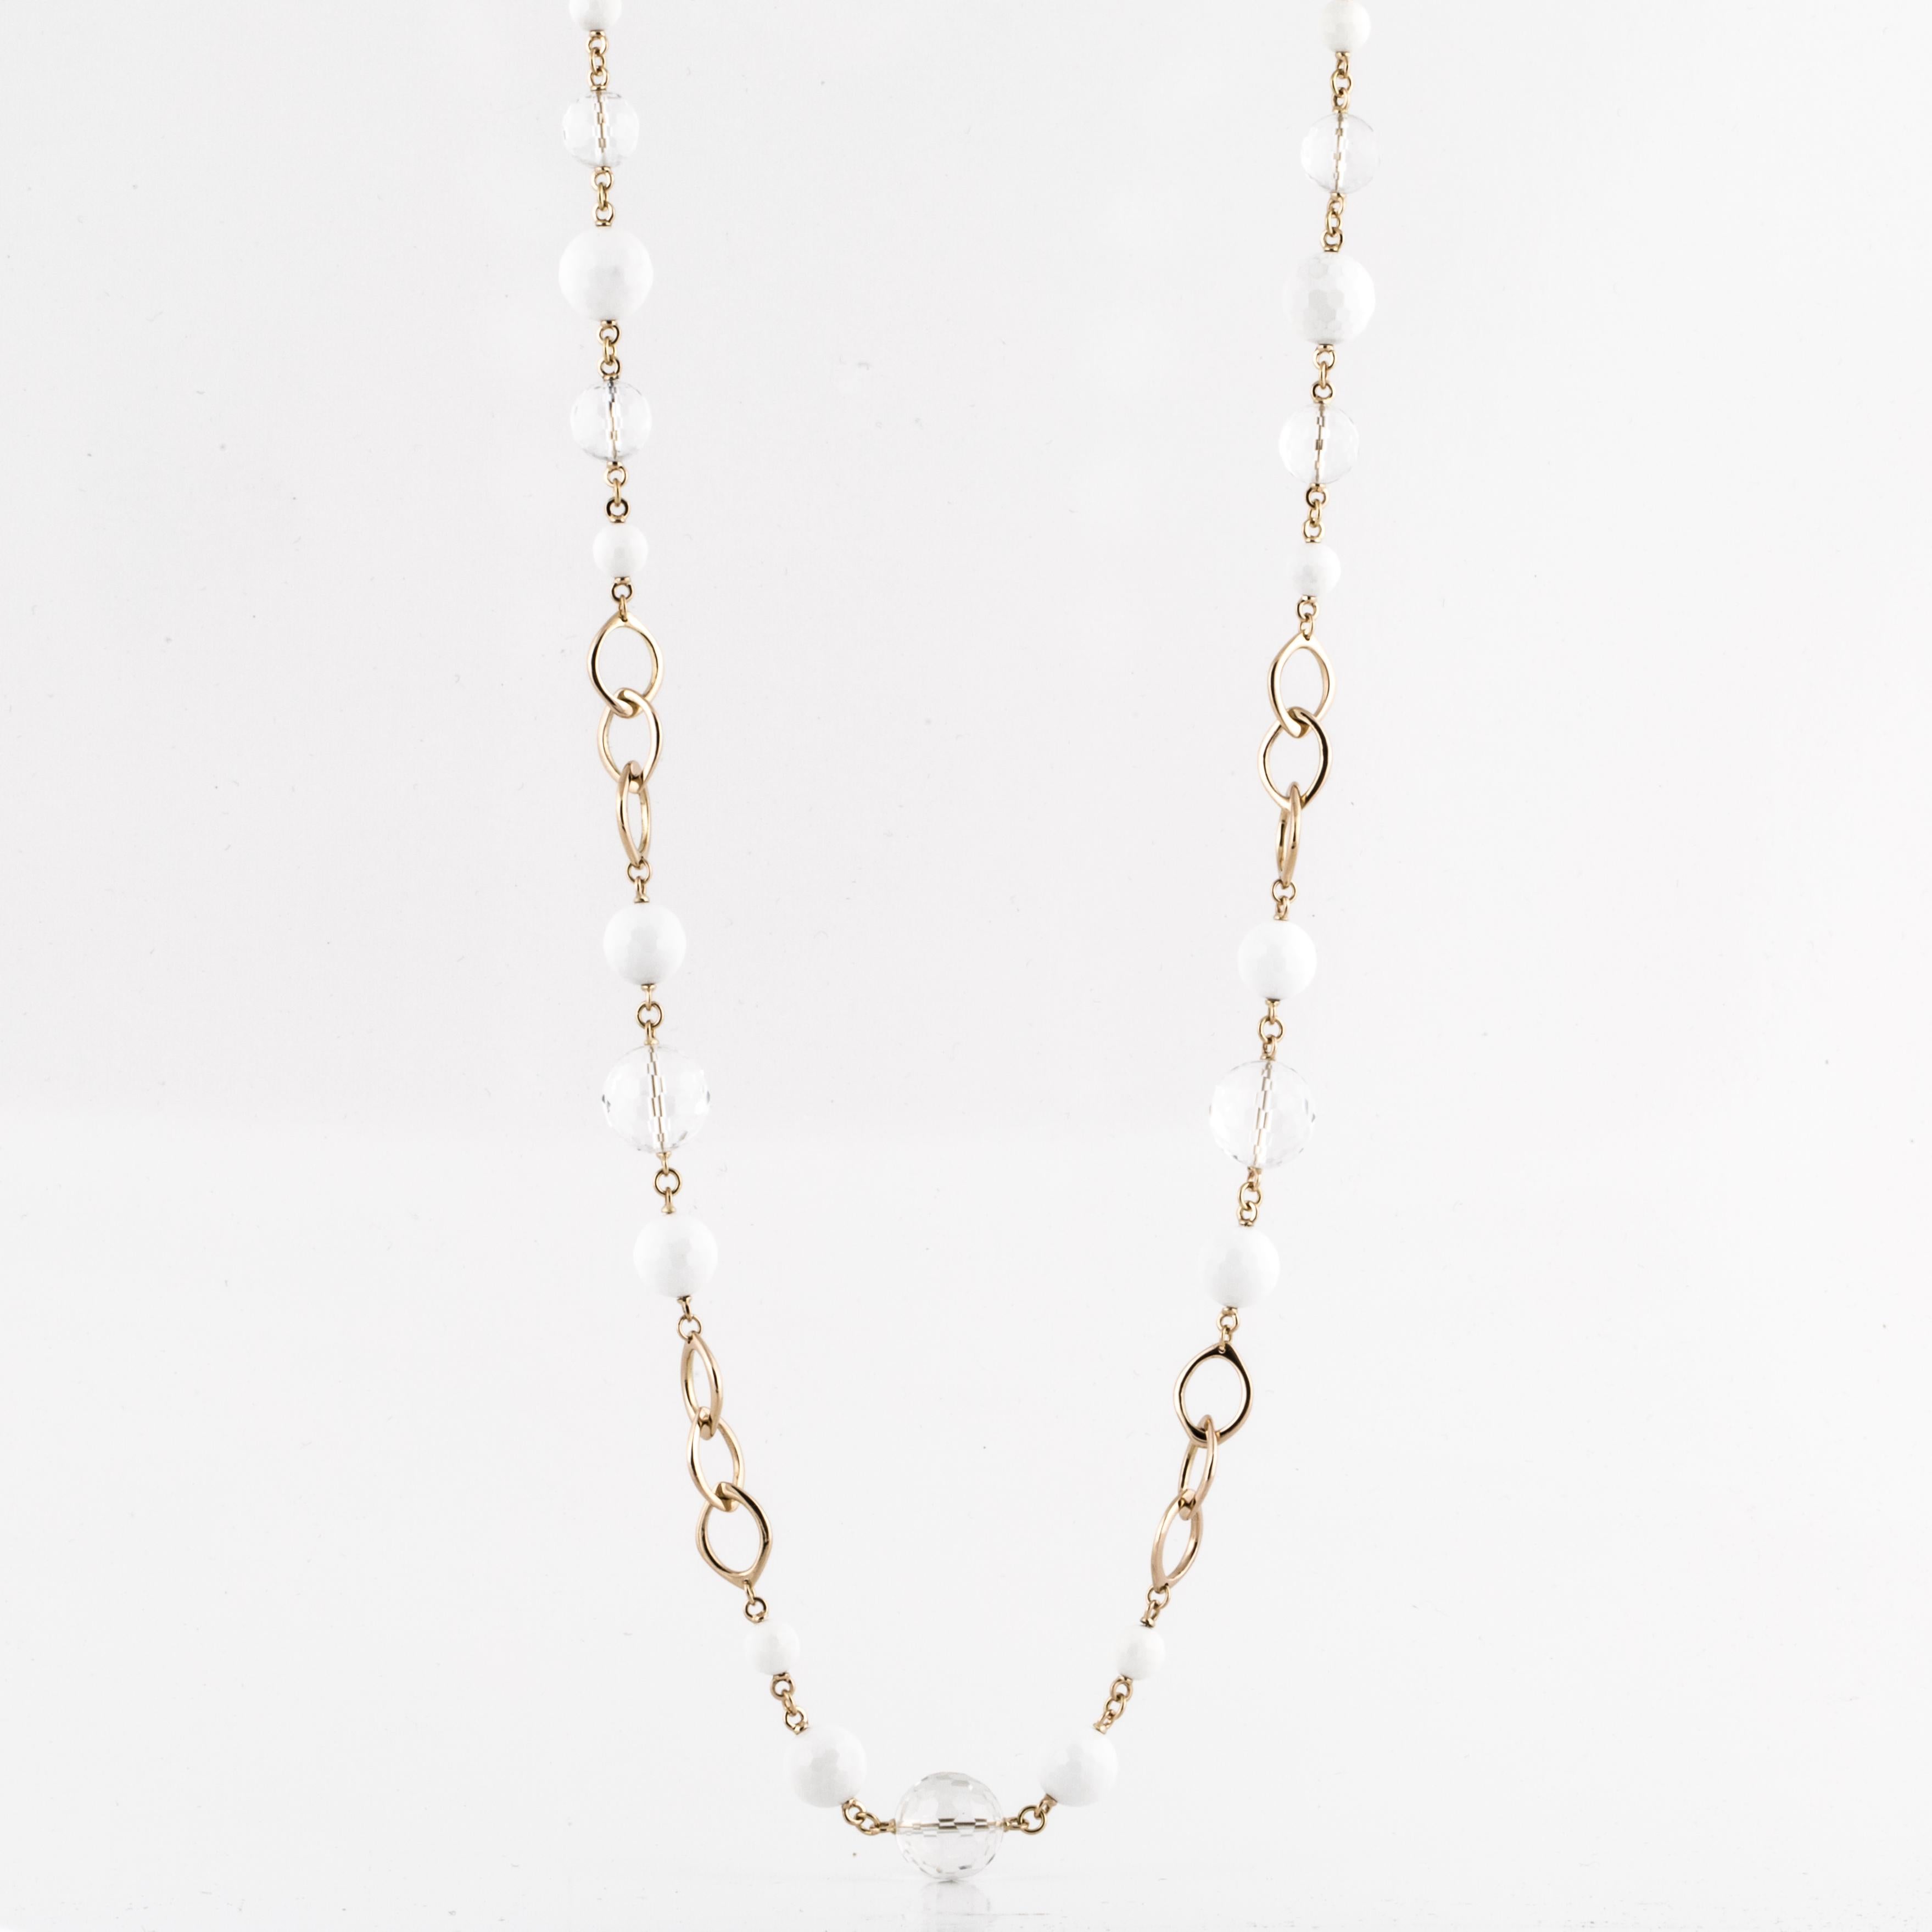 18K yellow gold necklace with faceted white onyx and rock crystal beads.  The piece measures 40